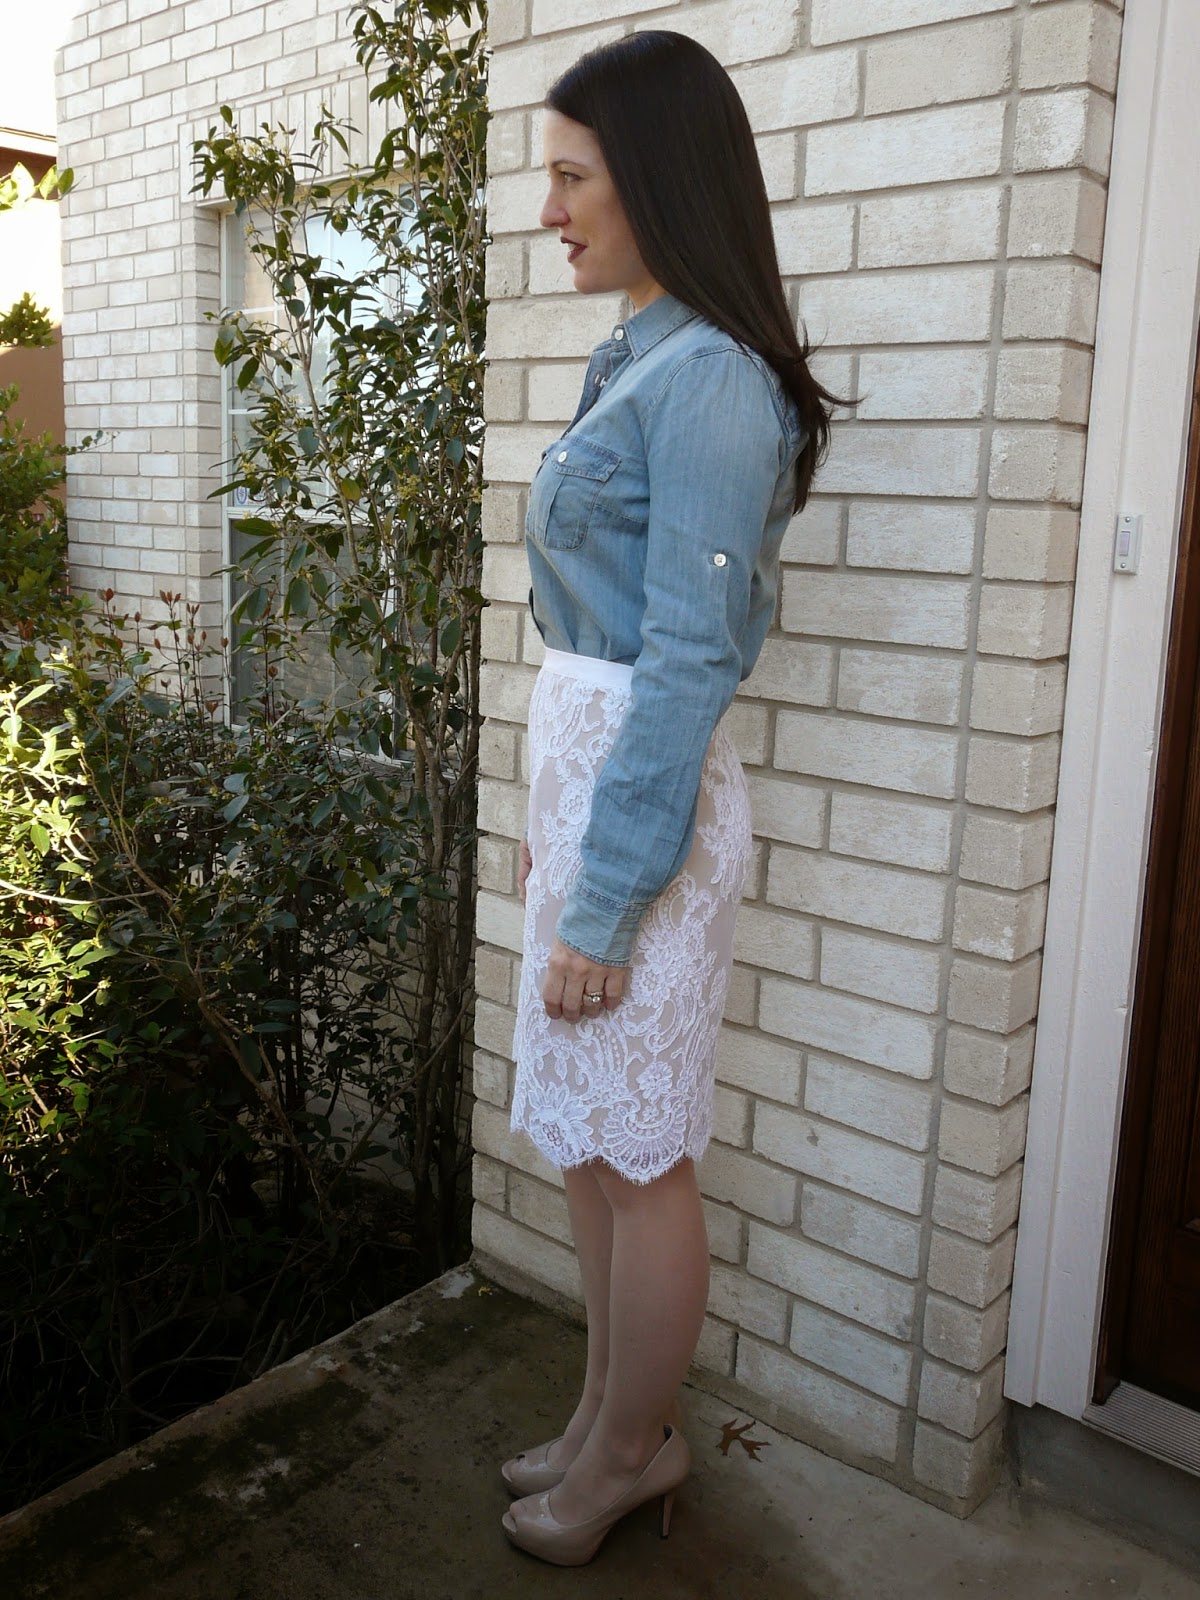 Bring On The Chambray: Lace Pencil Skirt + Button-Down Shirt